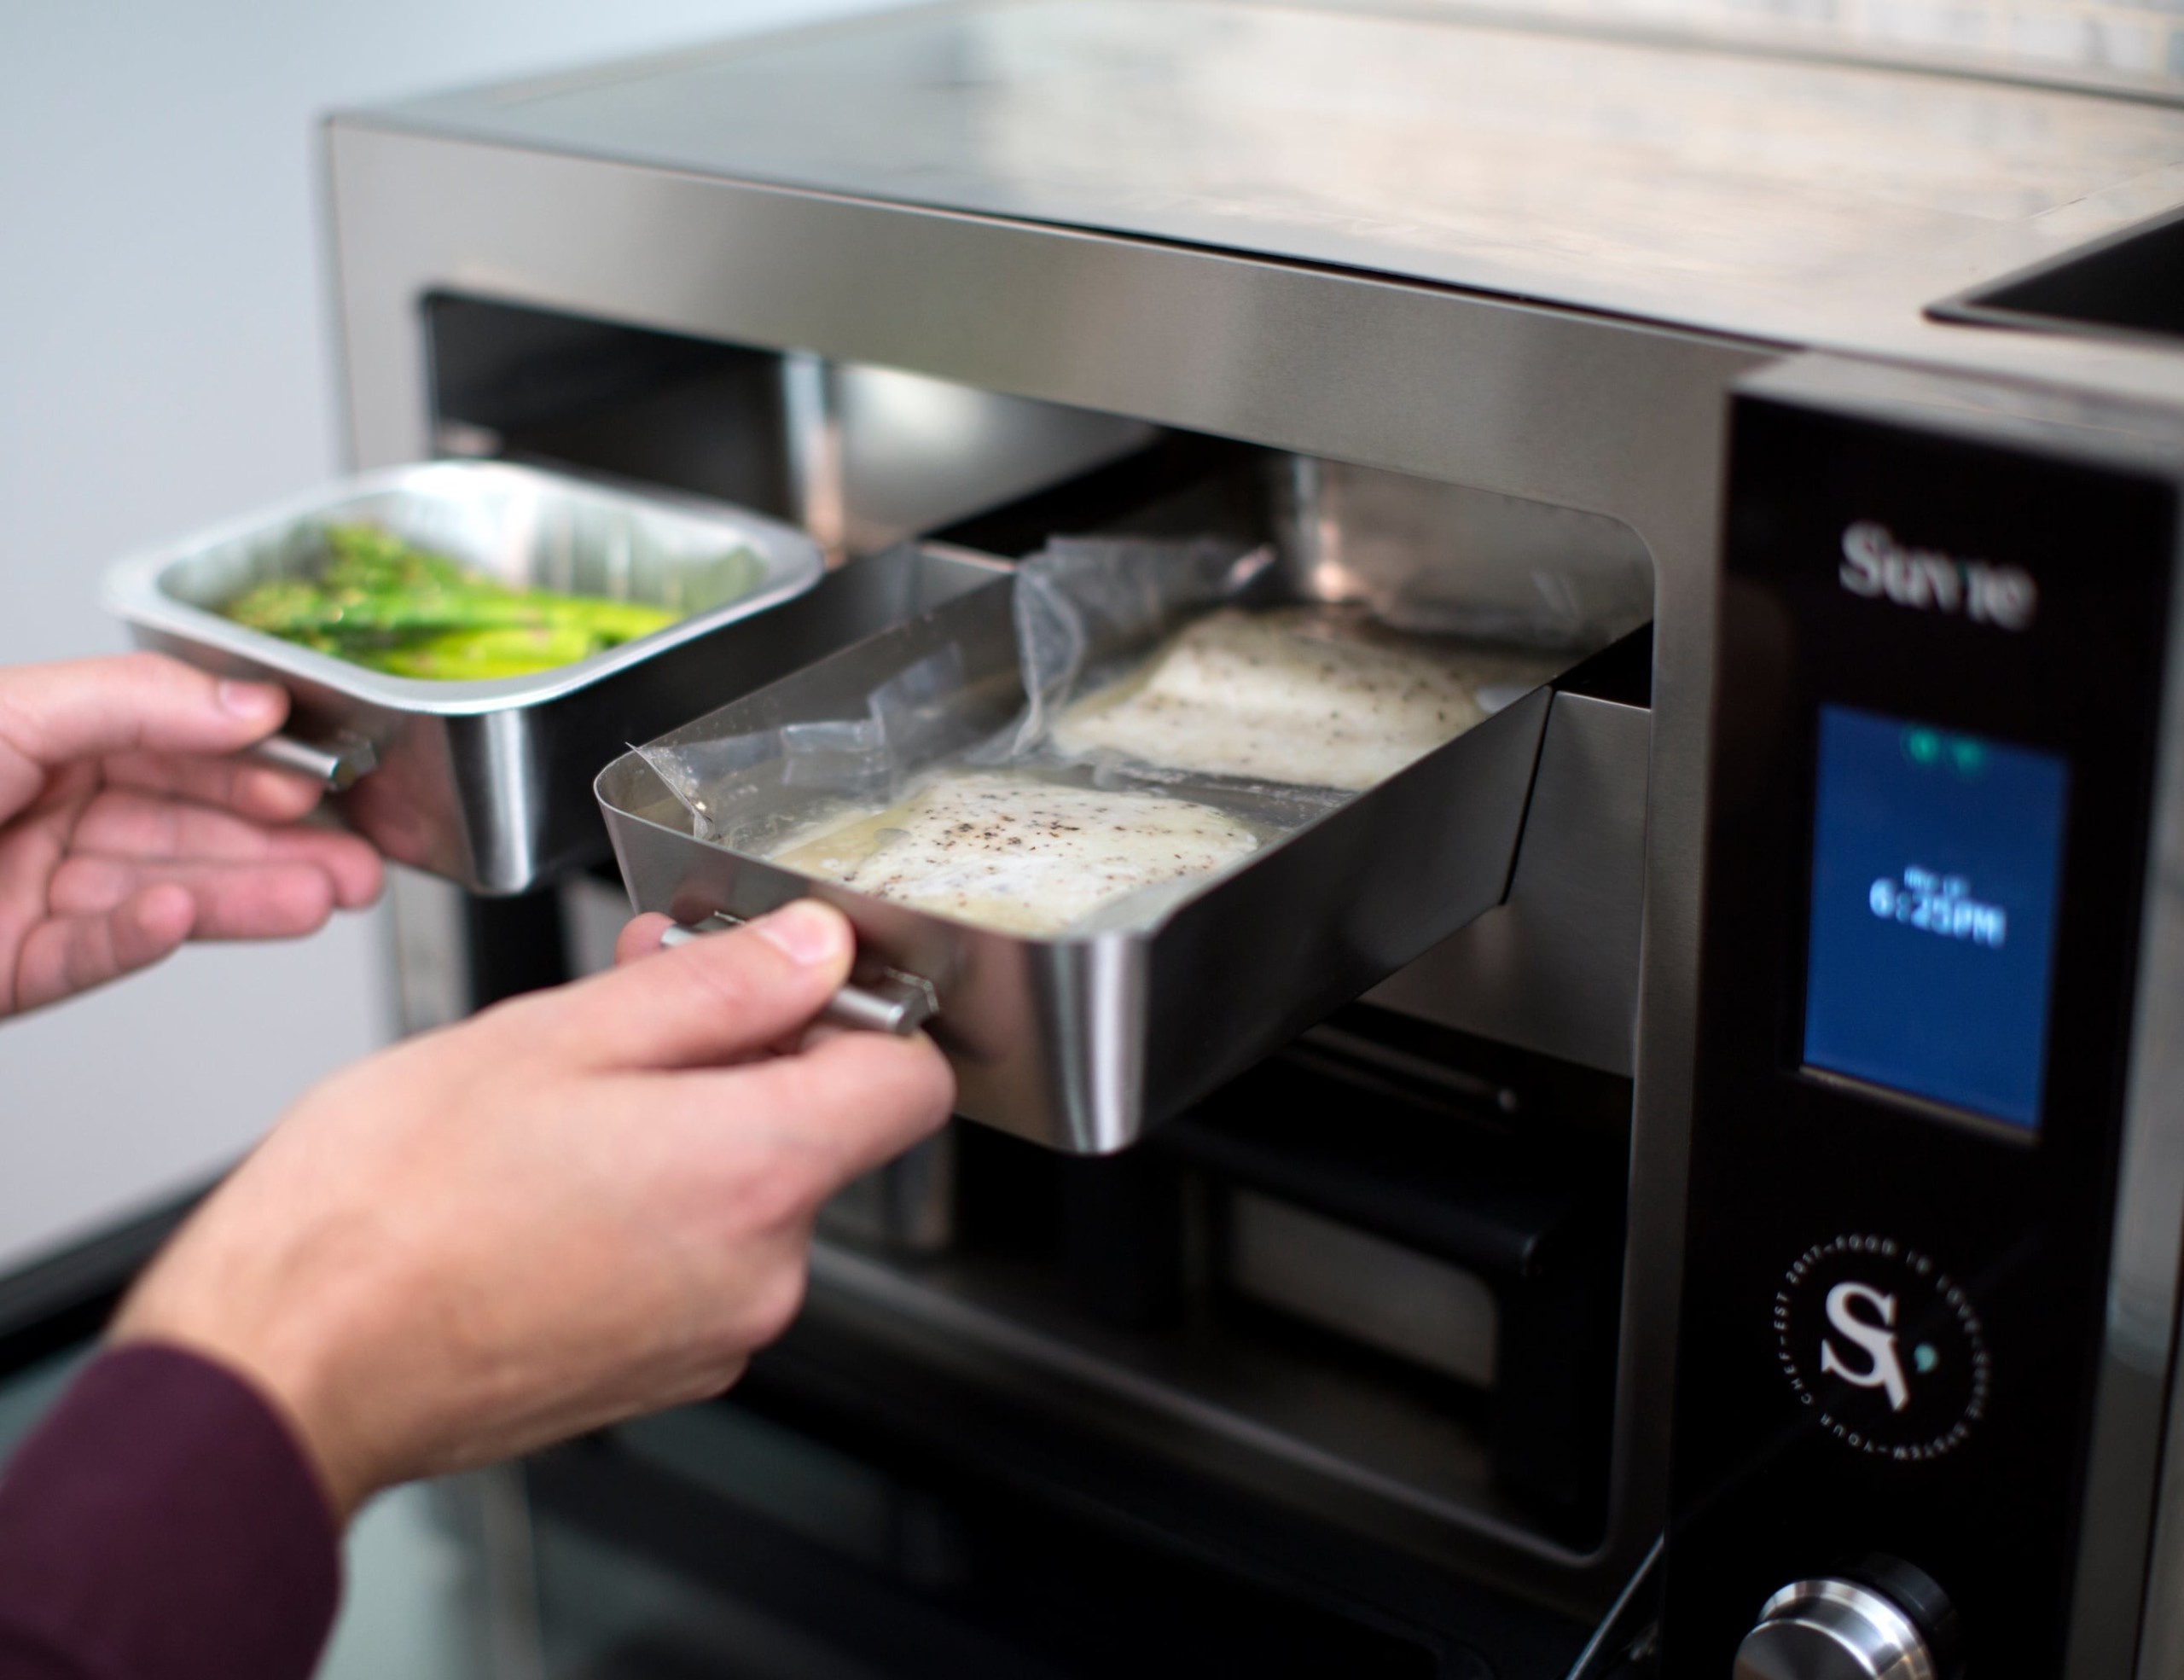 10 Smart kitchen gadgets to save you time and hassle